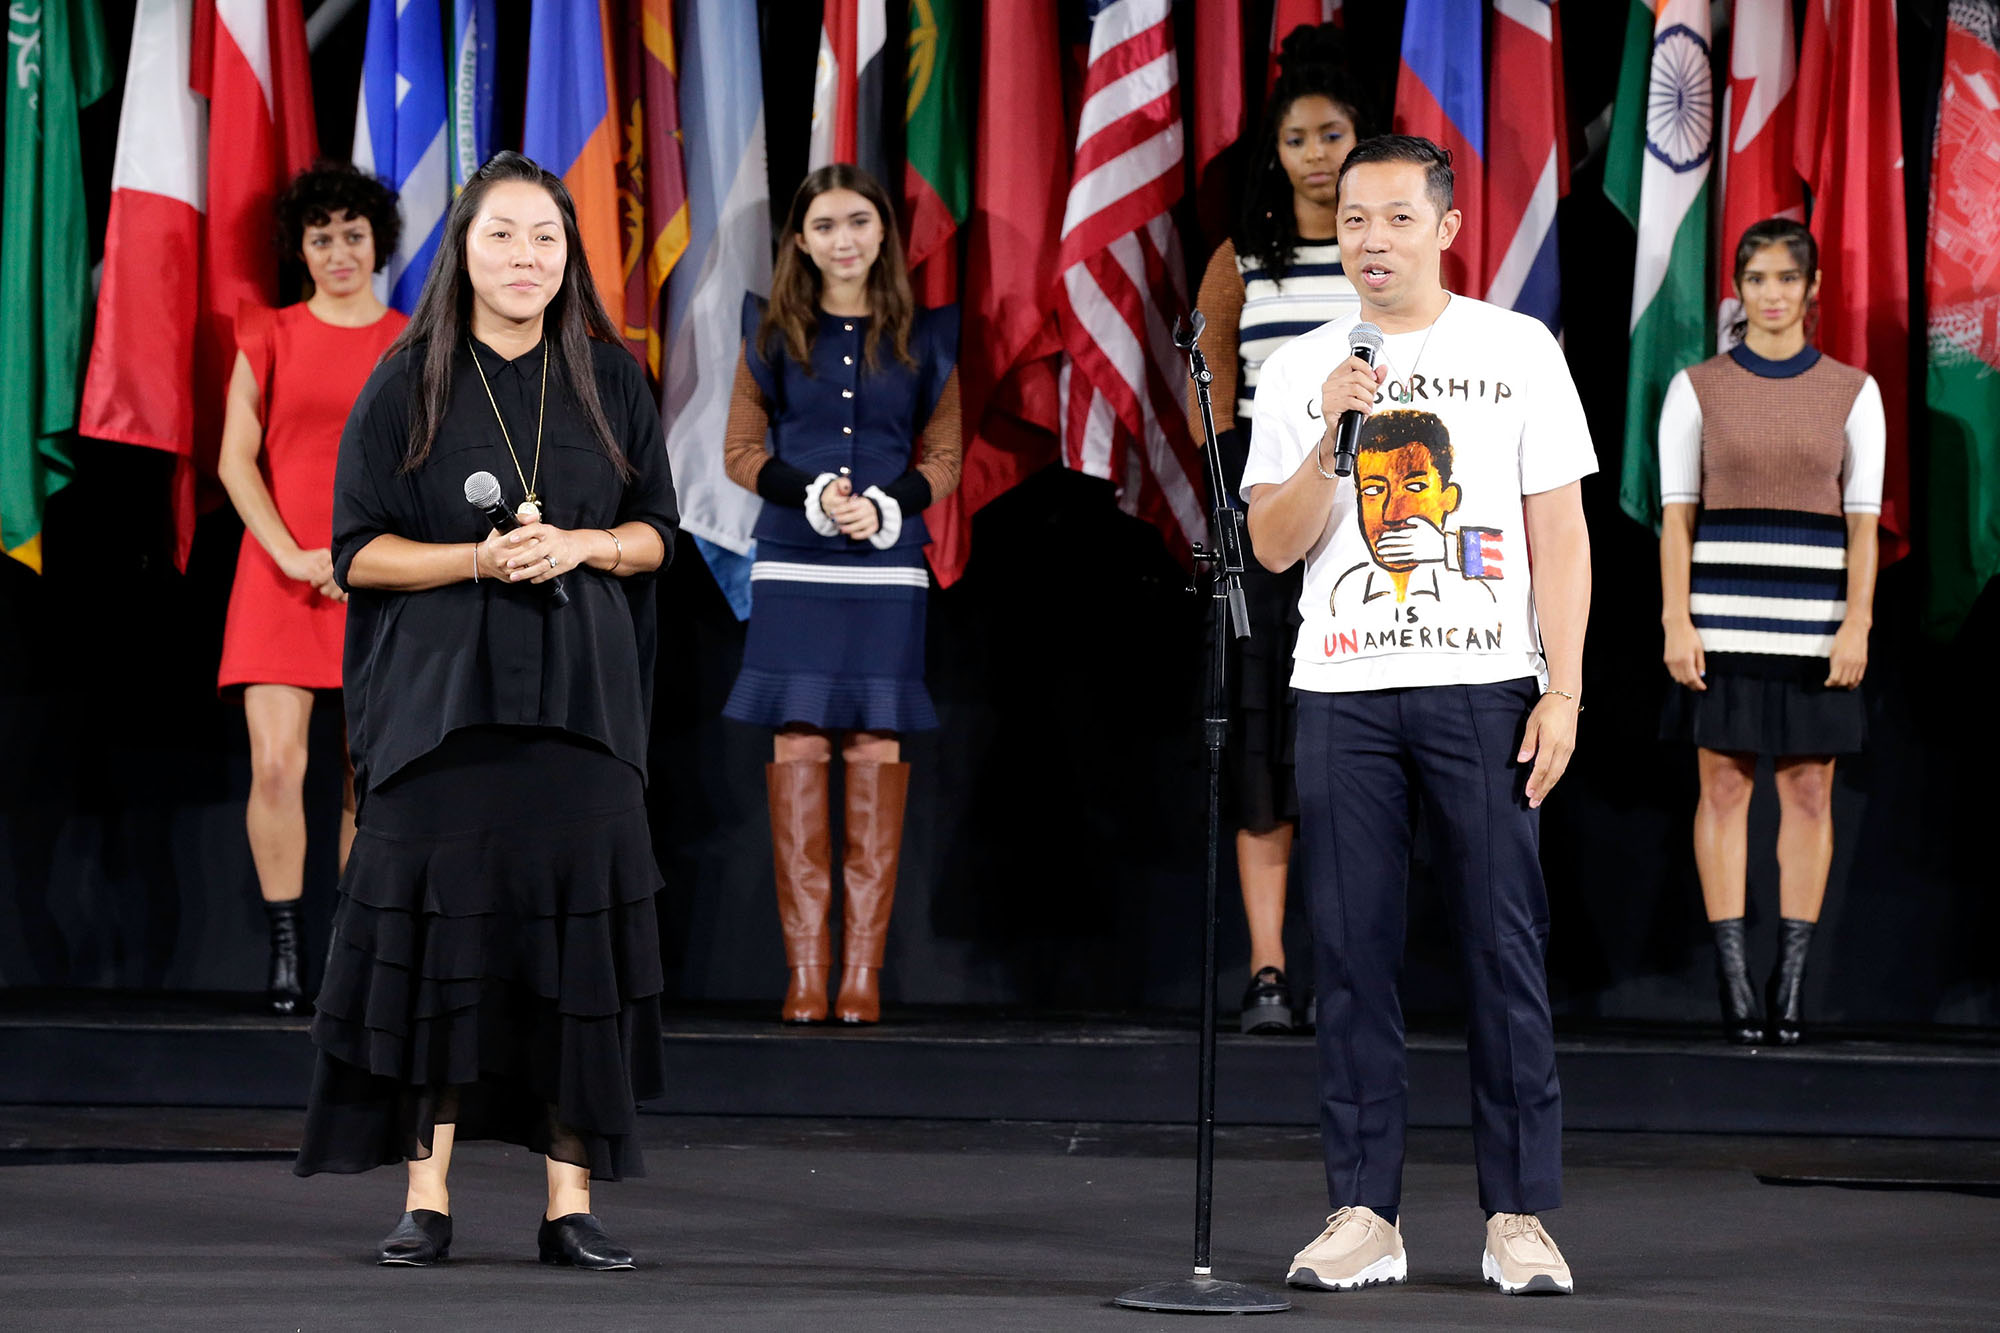 Designers Carol Lim and Humberto Leon speak onstage during the Opening Ceremony fashion show during New York Fashion Week at Jacob Javits Center on September 11, 2016 in New York City.  (Photo by JP Yim/Getty Images) (JP Yim—Getty Images)